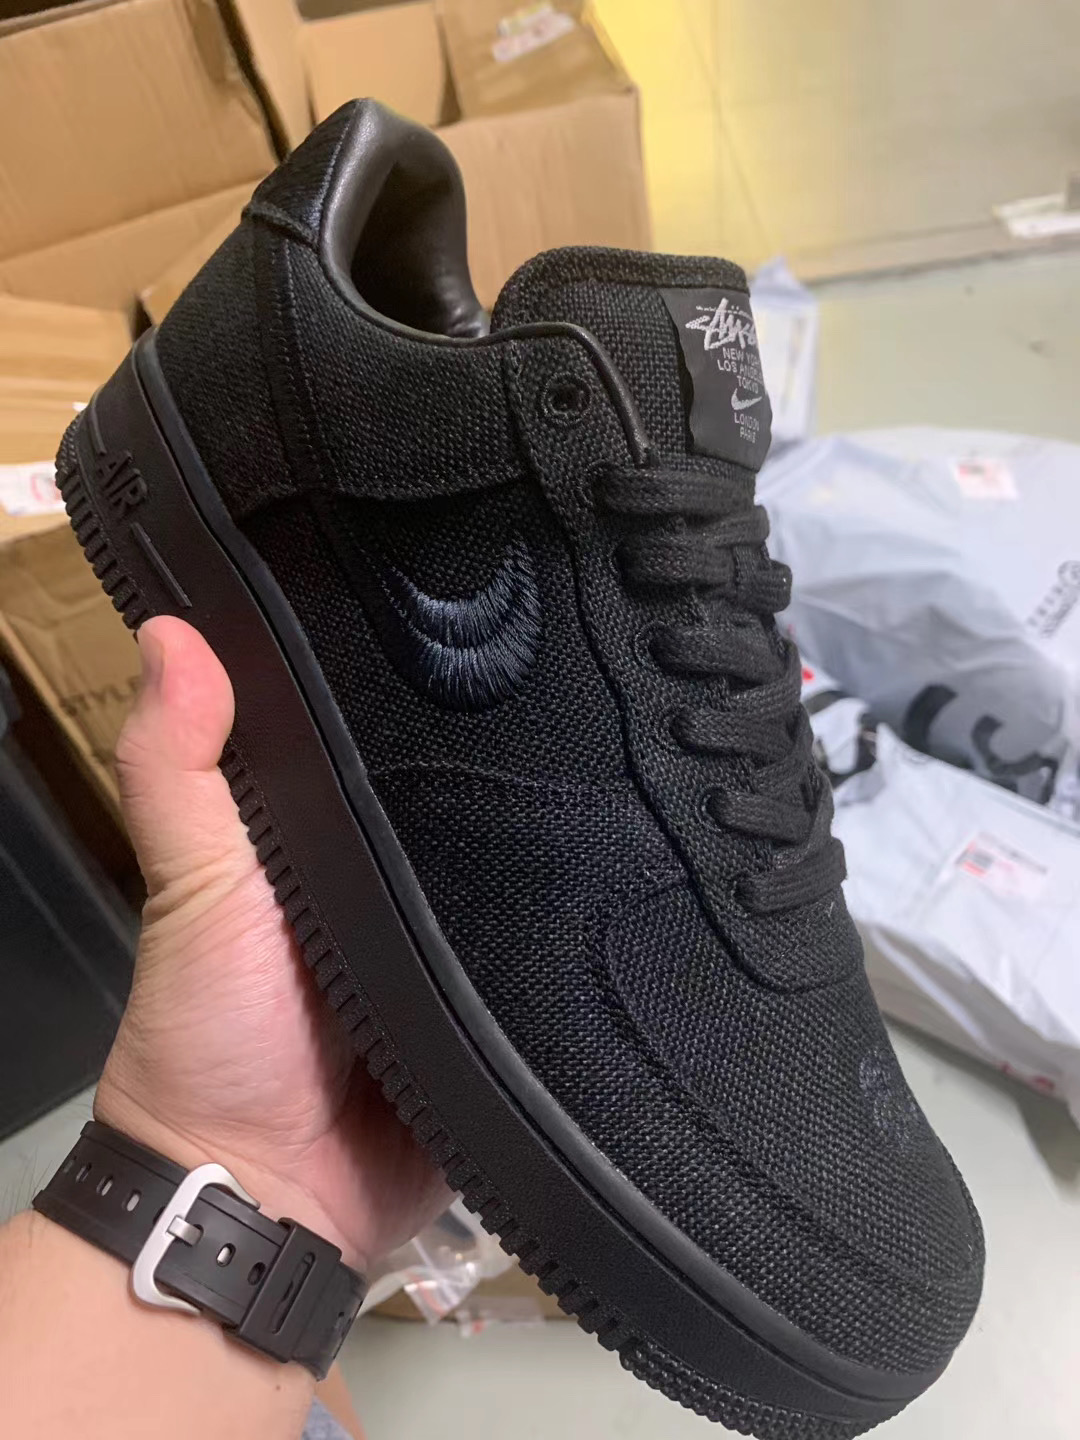 Stussy Nike Air Force 1 Low Black CZ9084-001 Release Date